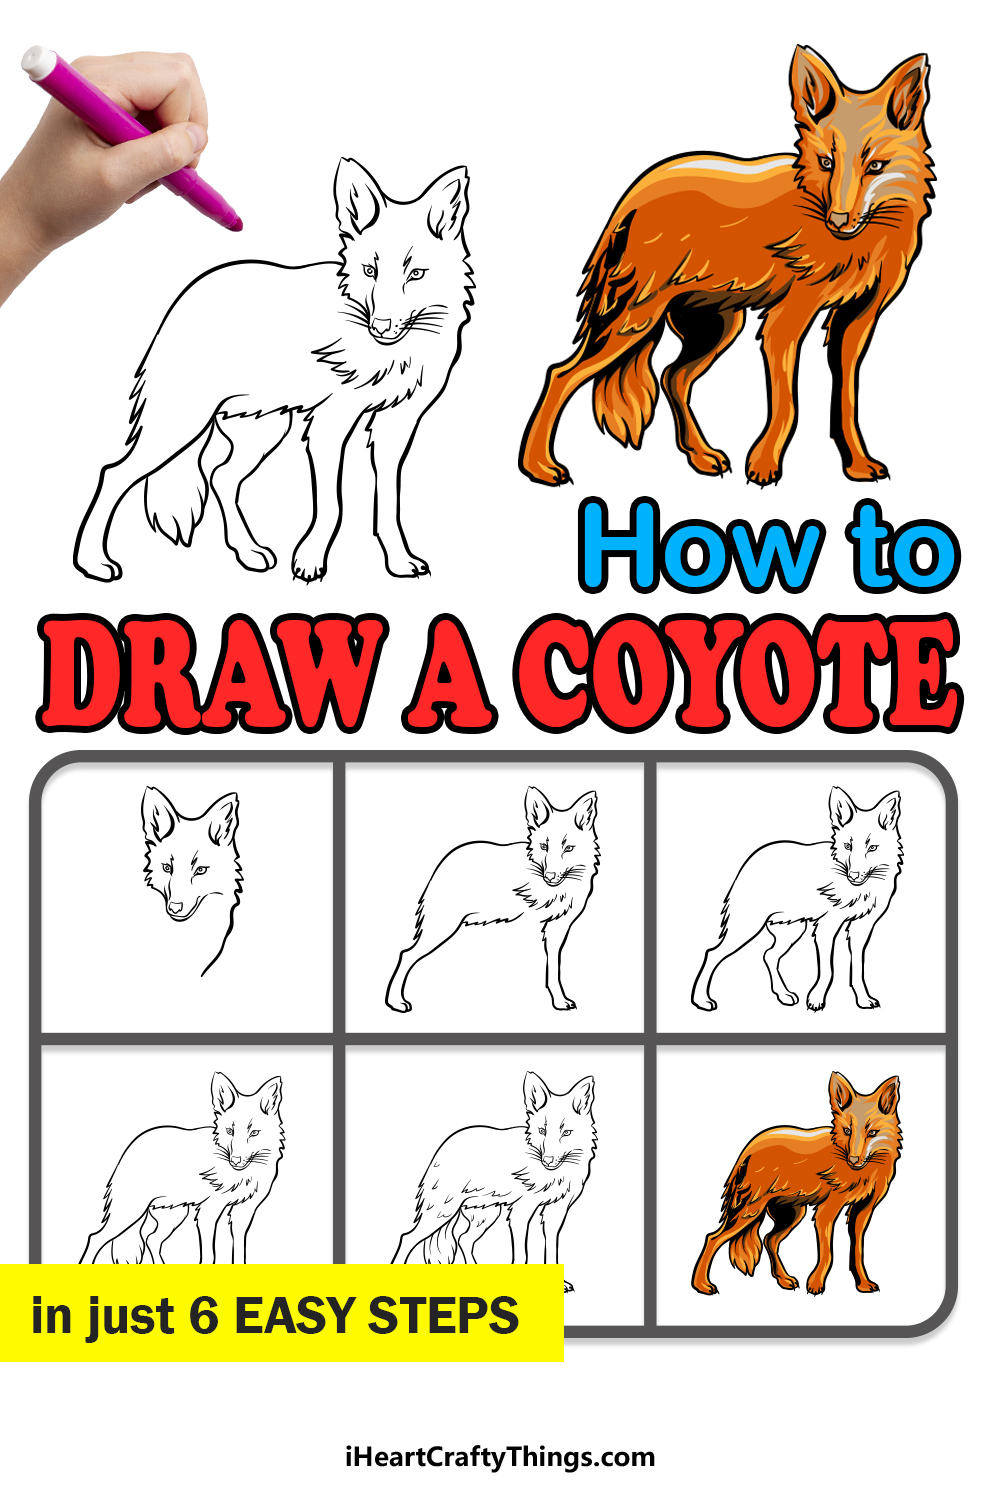 how to draw a Coyote in 6 easy steps